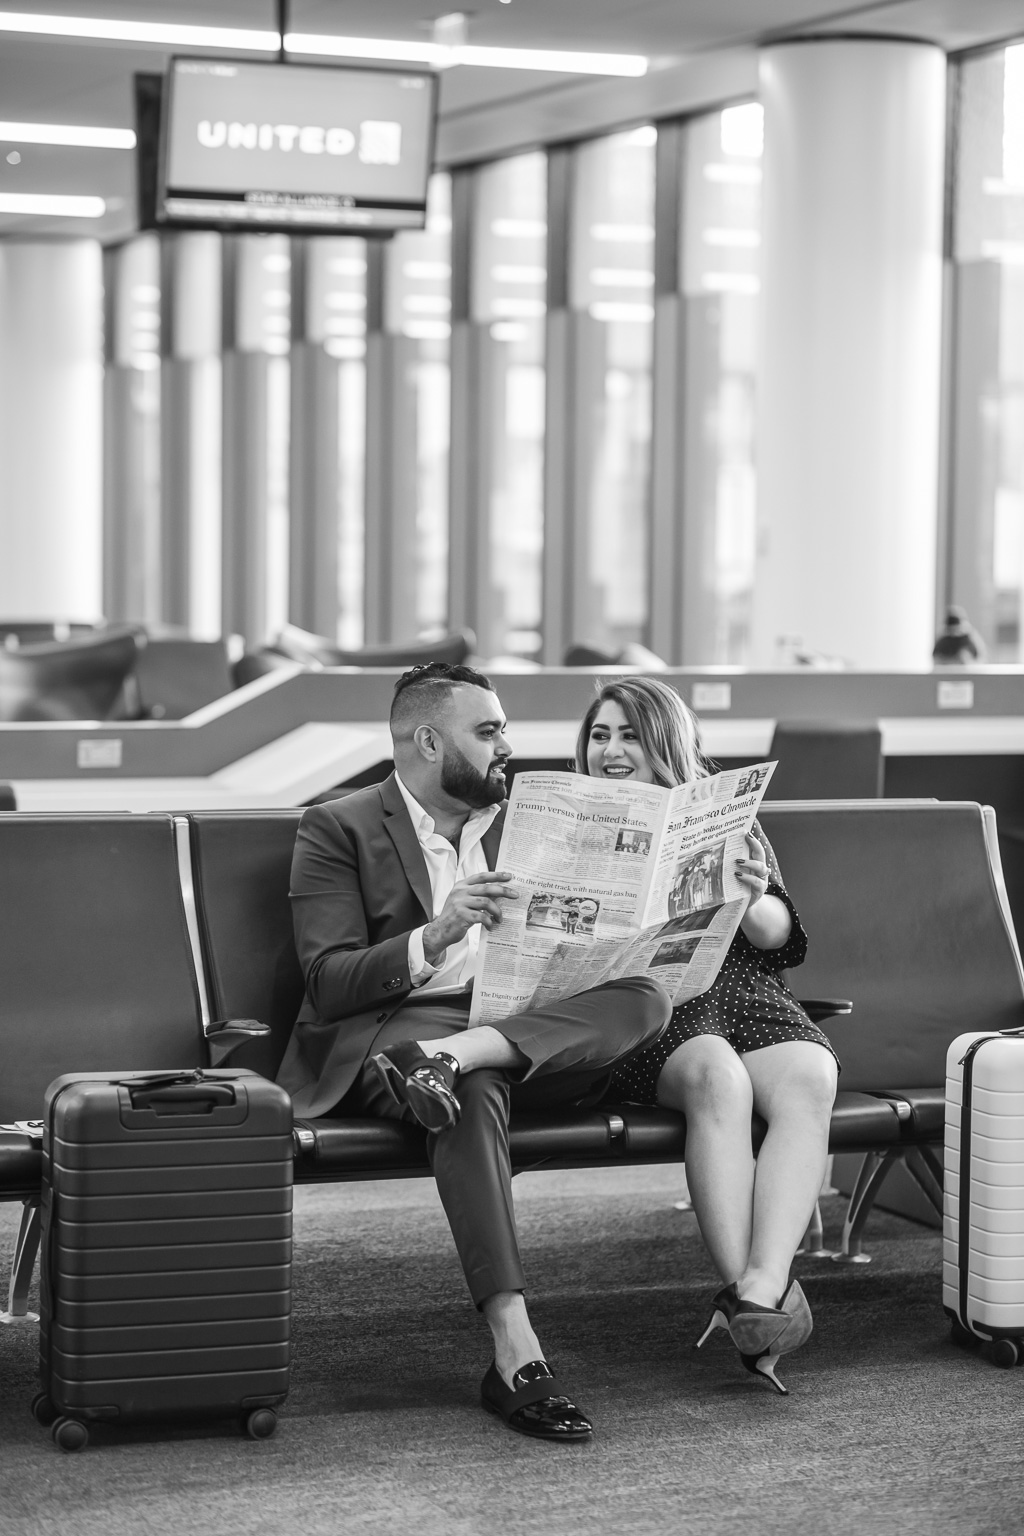 engagement photo at the United Airlines terminal in SFO